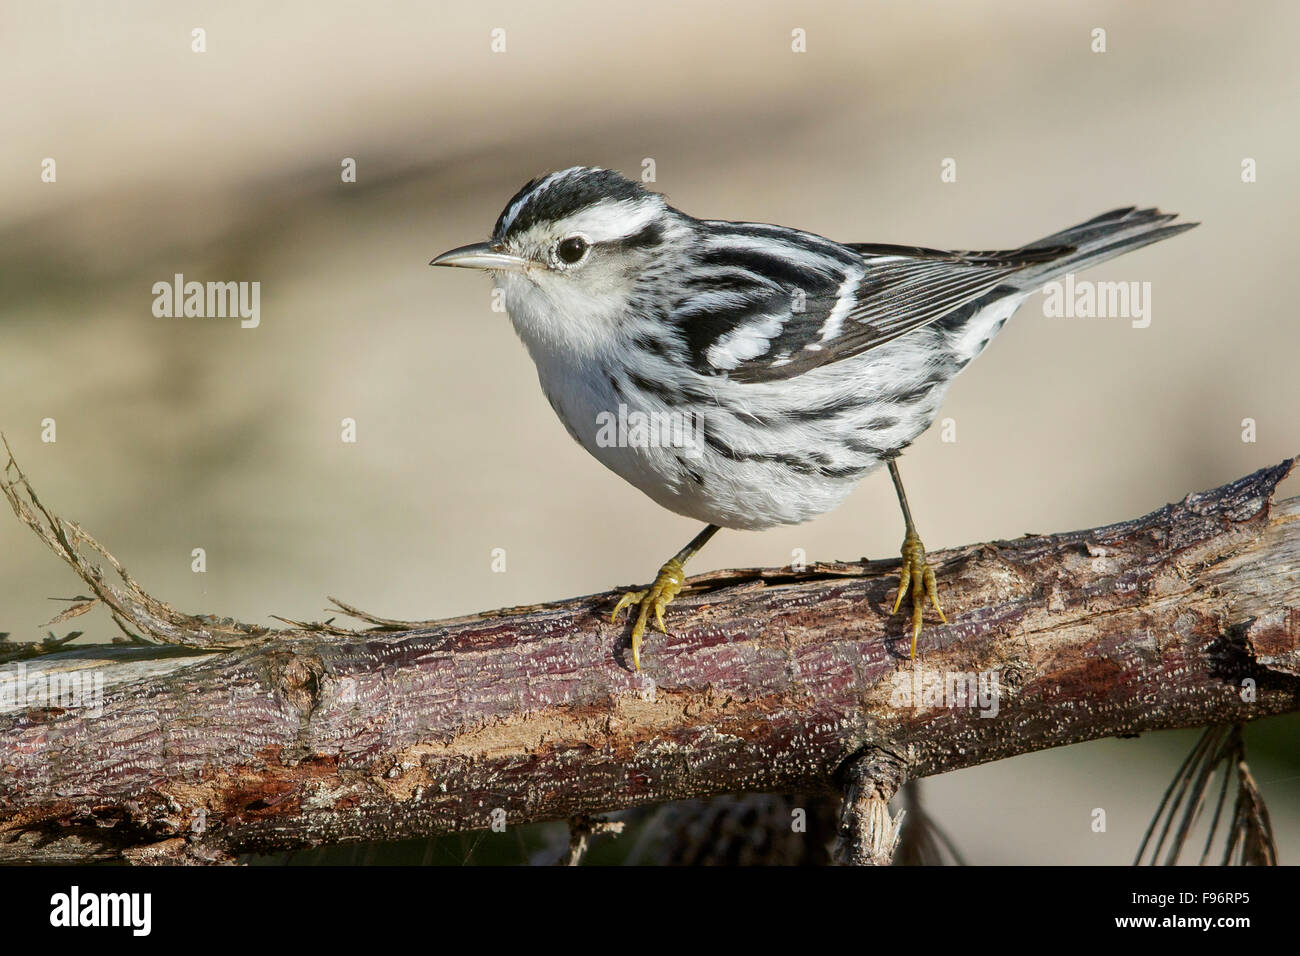 BlackandWhite Warbler (Mniotilta varia) perched on a branch in Cuba. Stock Photo